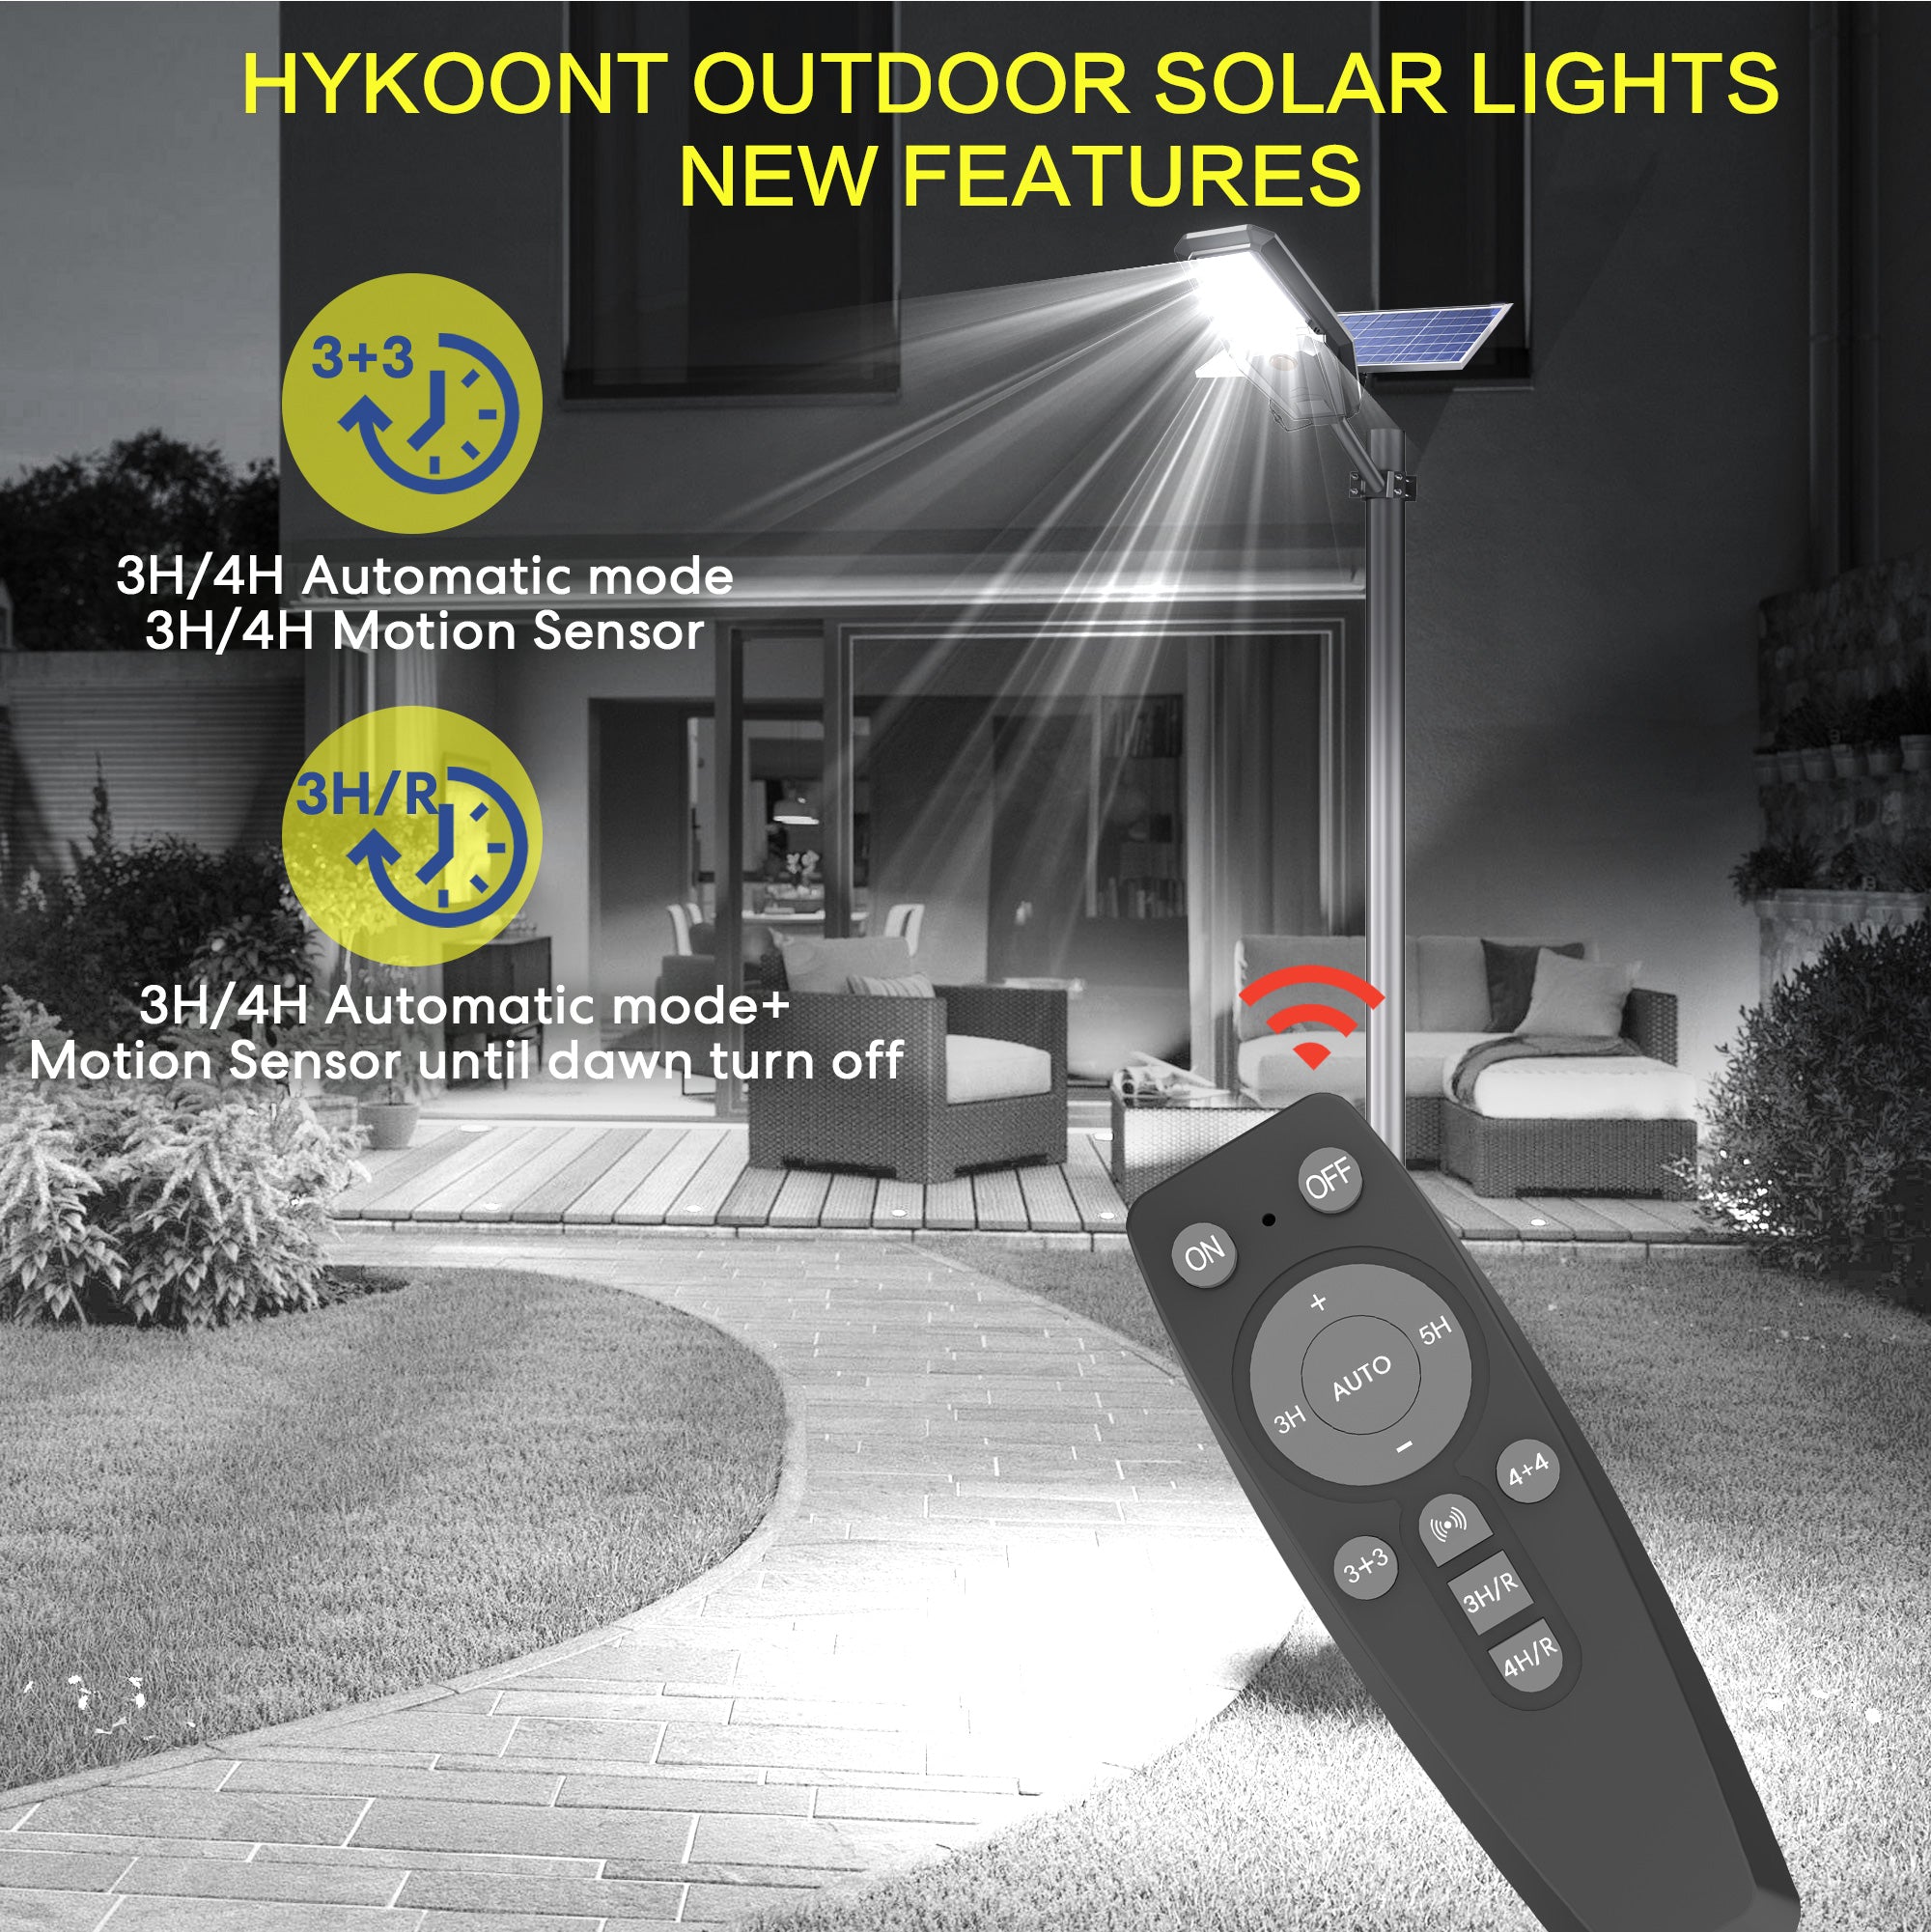 Hykoont 3000W XJ300 Solar Street Light Outdoor For Yard, Country